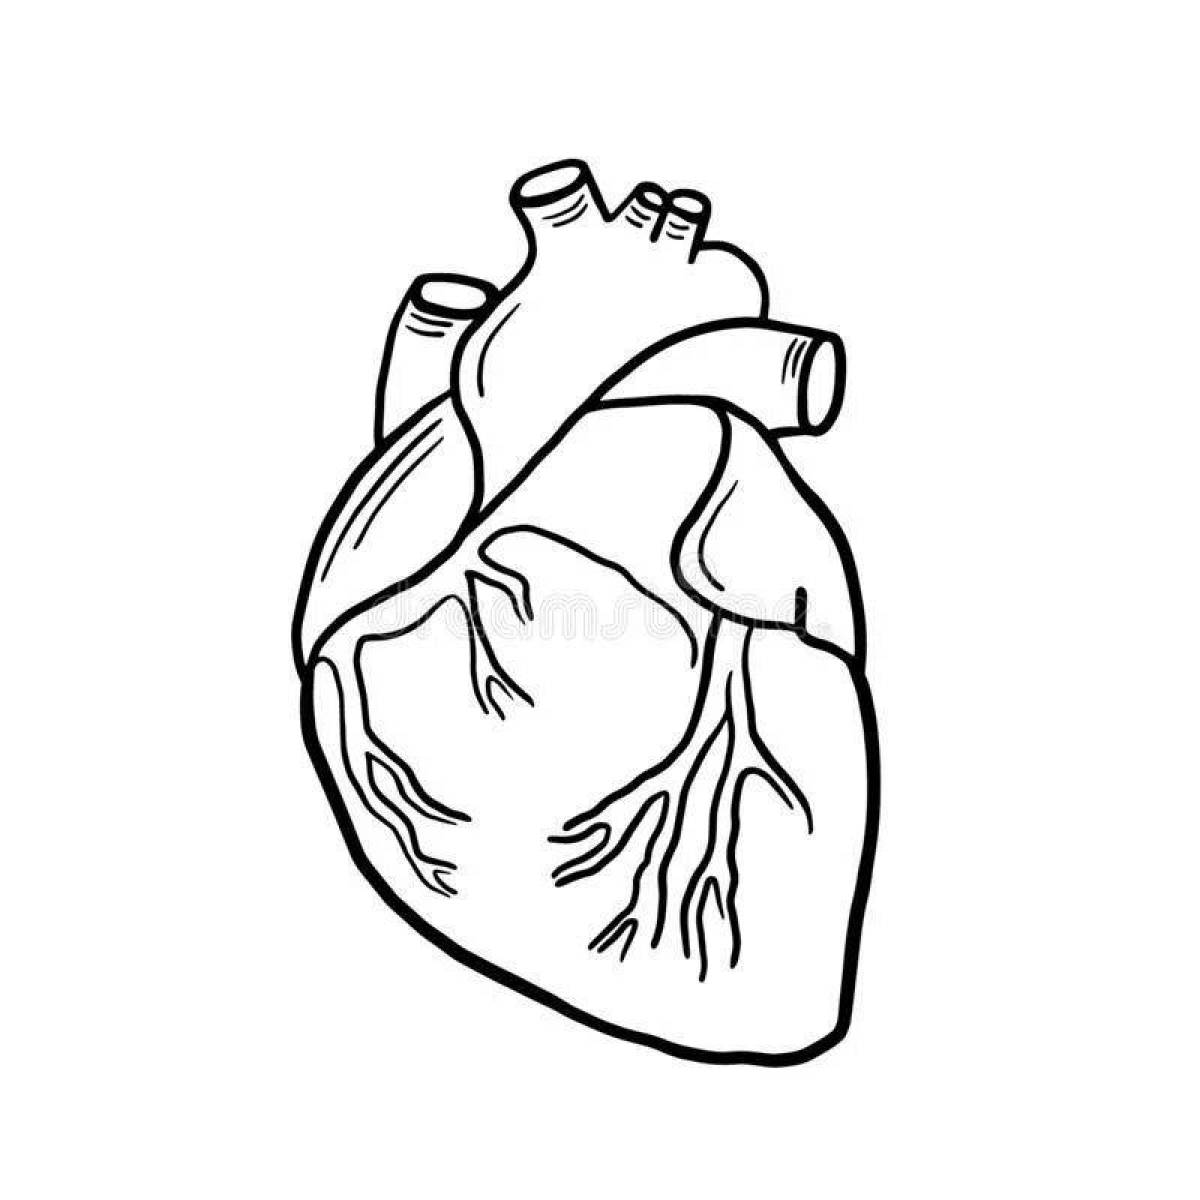 Adorable heart anatomy coloring page